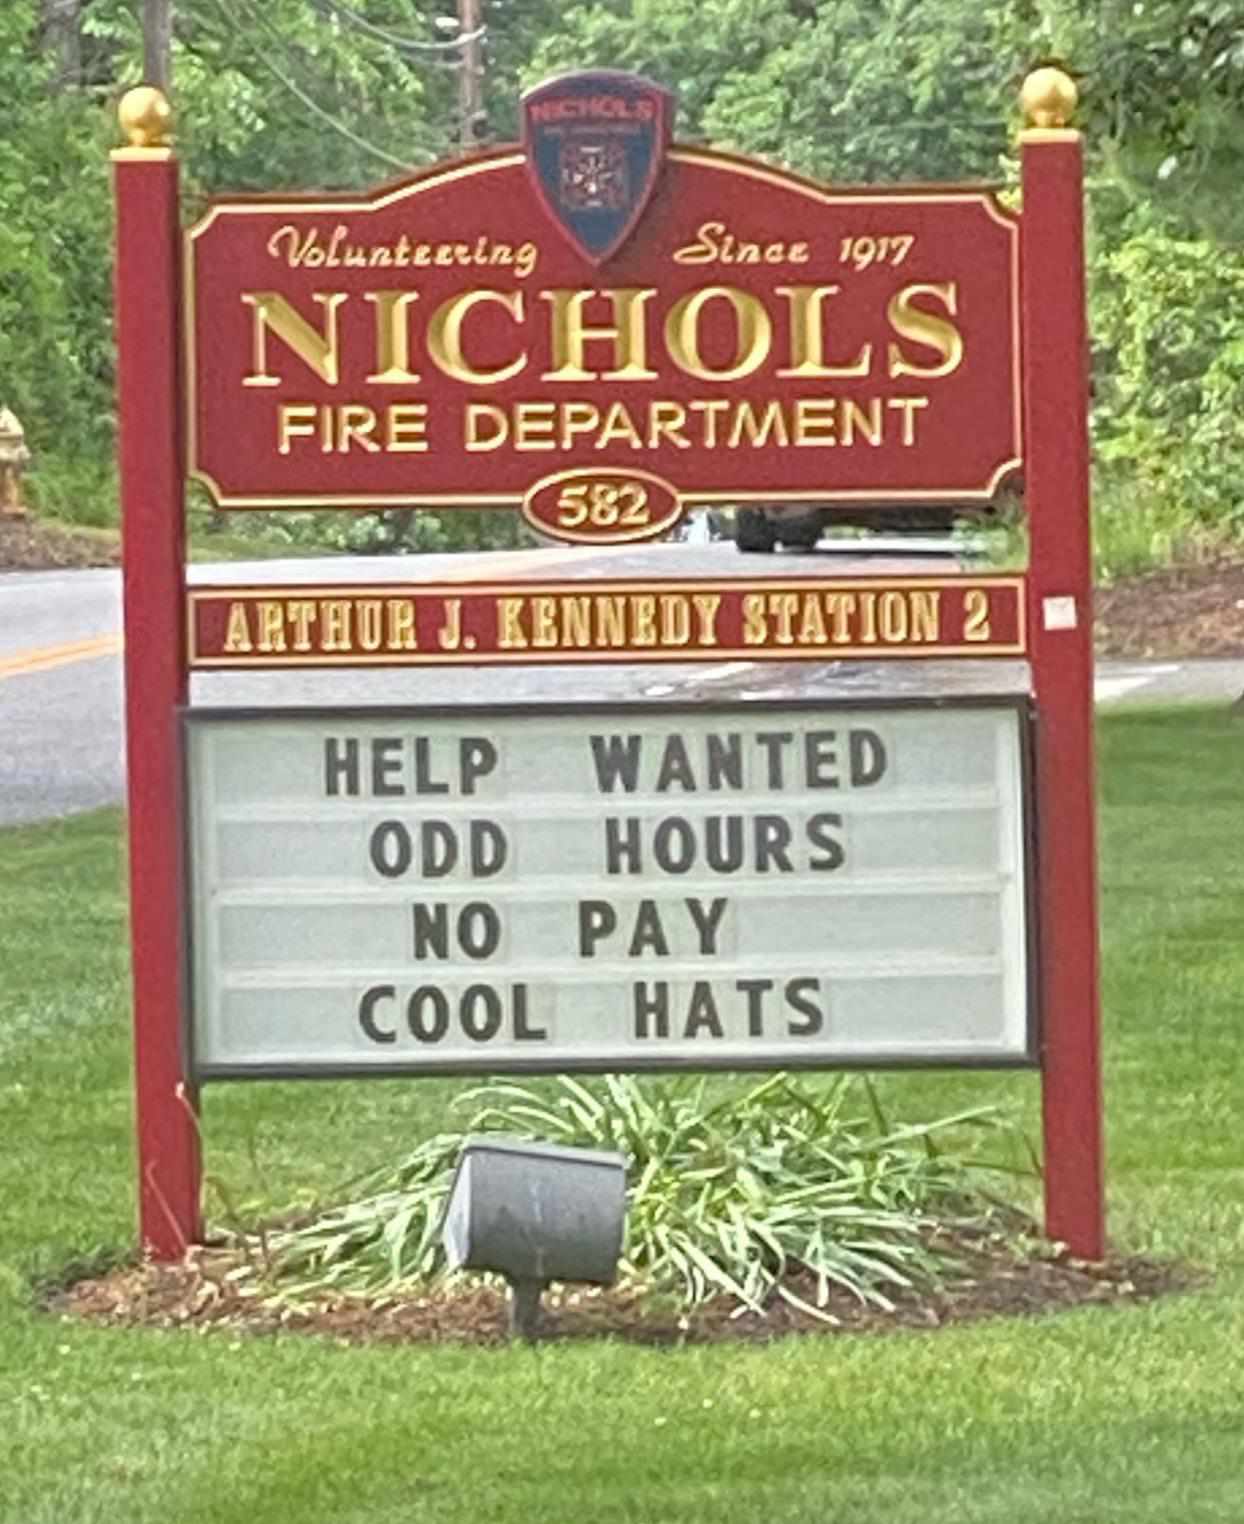 This volunteer fire department sign near my house